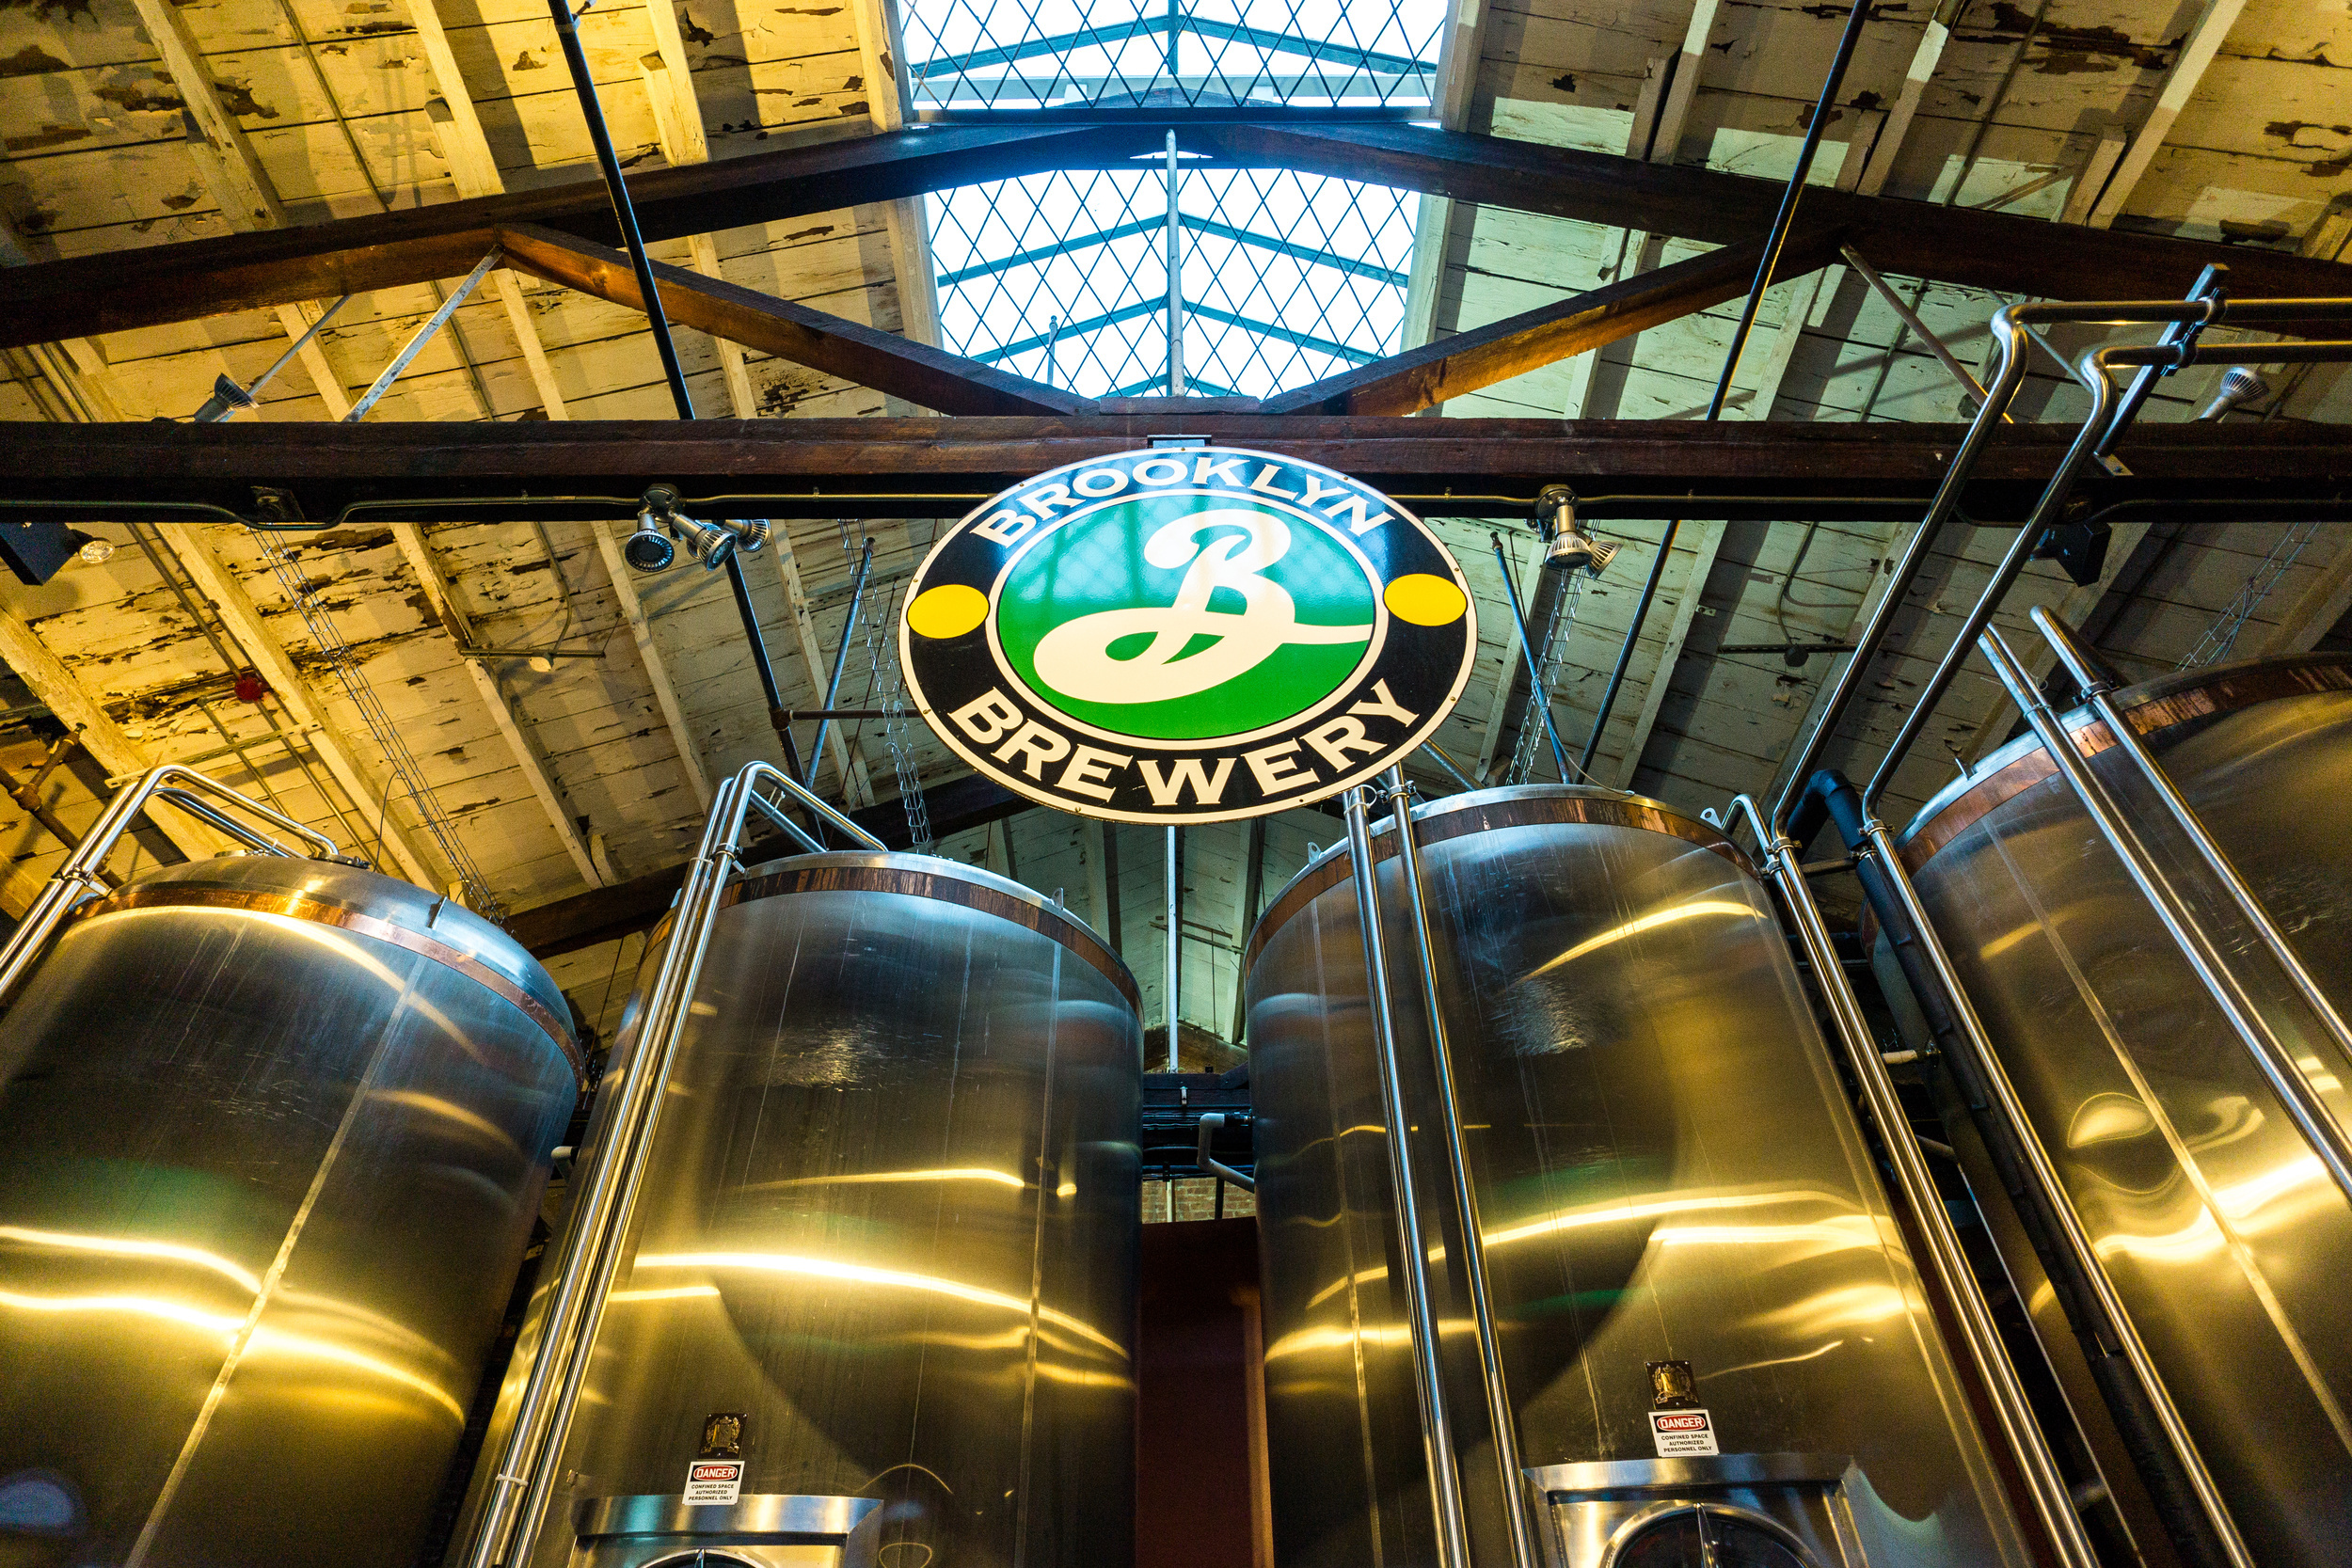 <p>Nestled in the confines of its namesake New York borough, Brooklyn Brewery has become not just a national brand but one that sees its beer in more than 30 countries. Its brewmaster, Garrett Oliver, is a James Beard award winner, which explains its tremendous success. Brooklyn isn't short of things to do and places to visit, but no trip to the area is complete for a beer lover without stopping by this taproom. </p><p>You may also like: <a href='https://www.yardbarker.com/lifestyle/articles/the_20_best_non_breakfast_uses_for_eggs_022724/s1__32867285'>The 20 best non-breakfast uses for eggs</a></p>